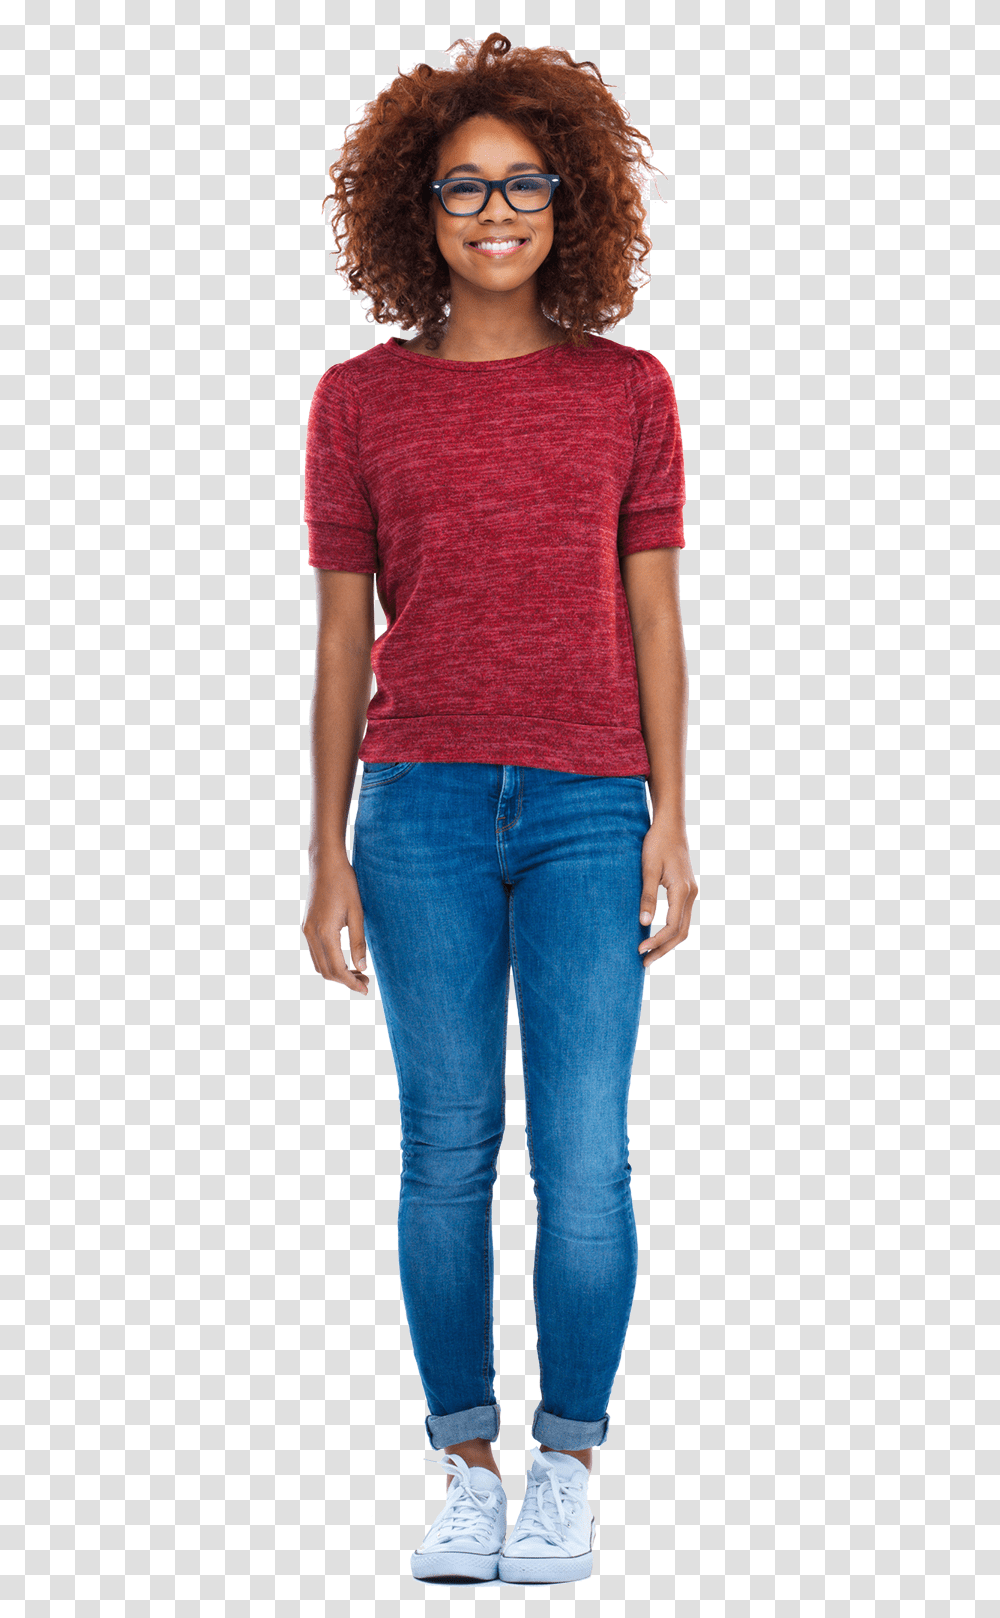 Person In Red Top With Arms By Side Pocket, Apparel, Pants, Human Transparent Png